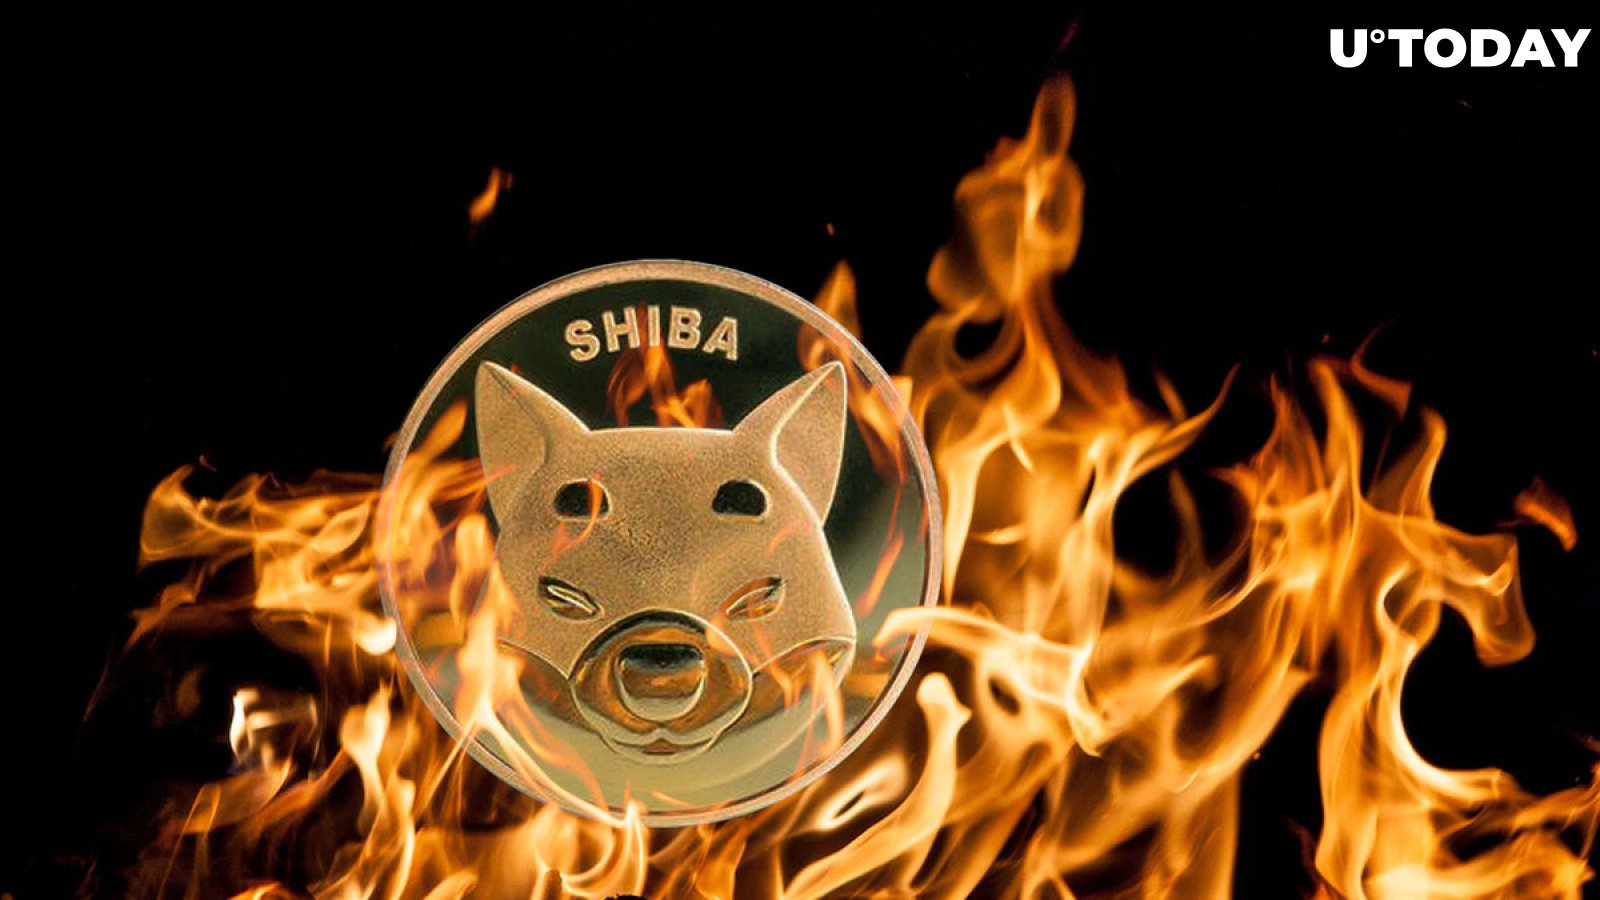 SHIB Burning Makes Leap, Here's How Much Was Burned Last Week